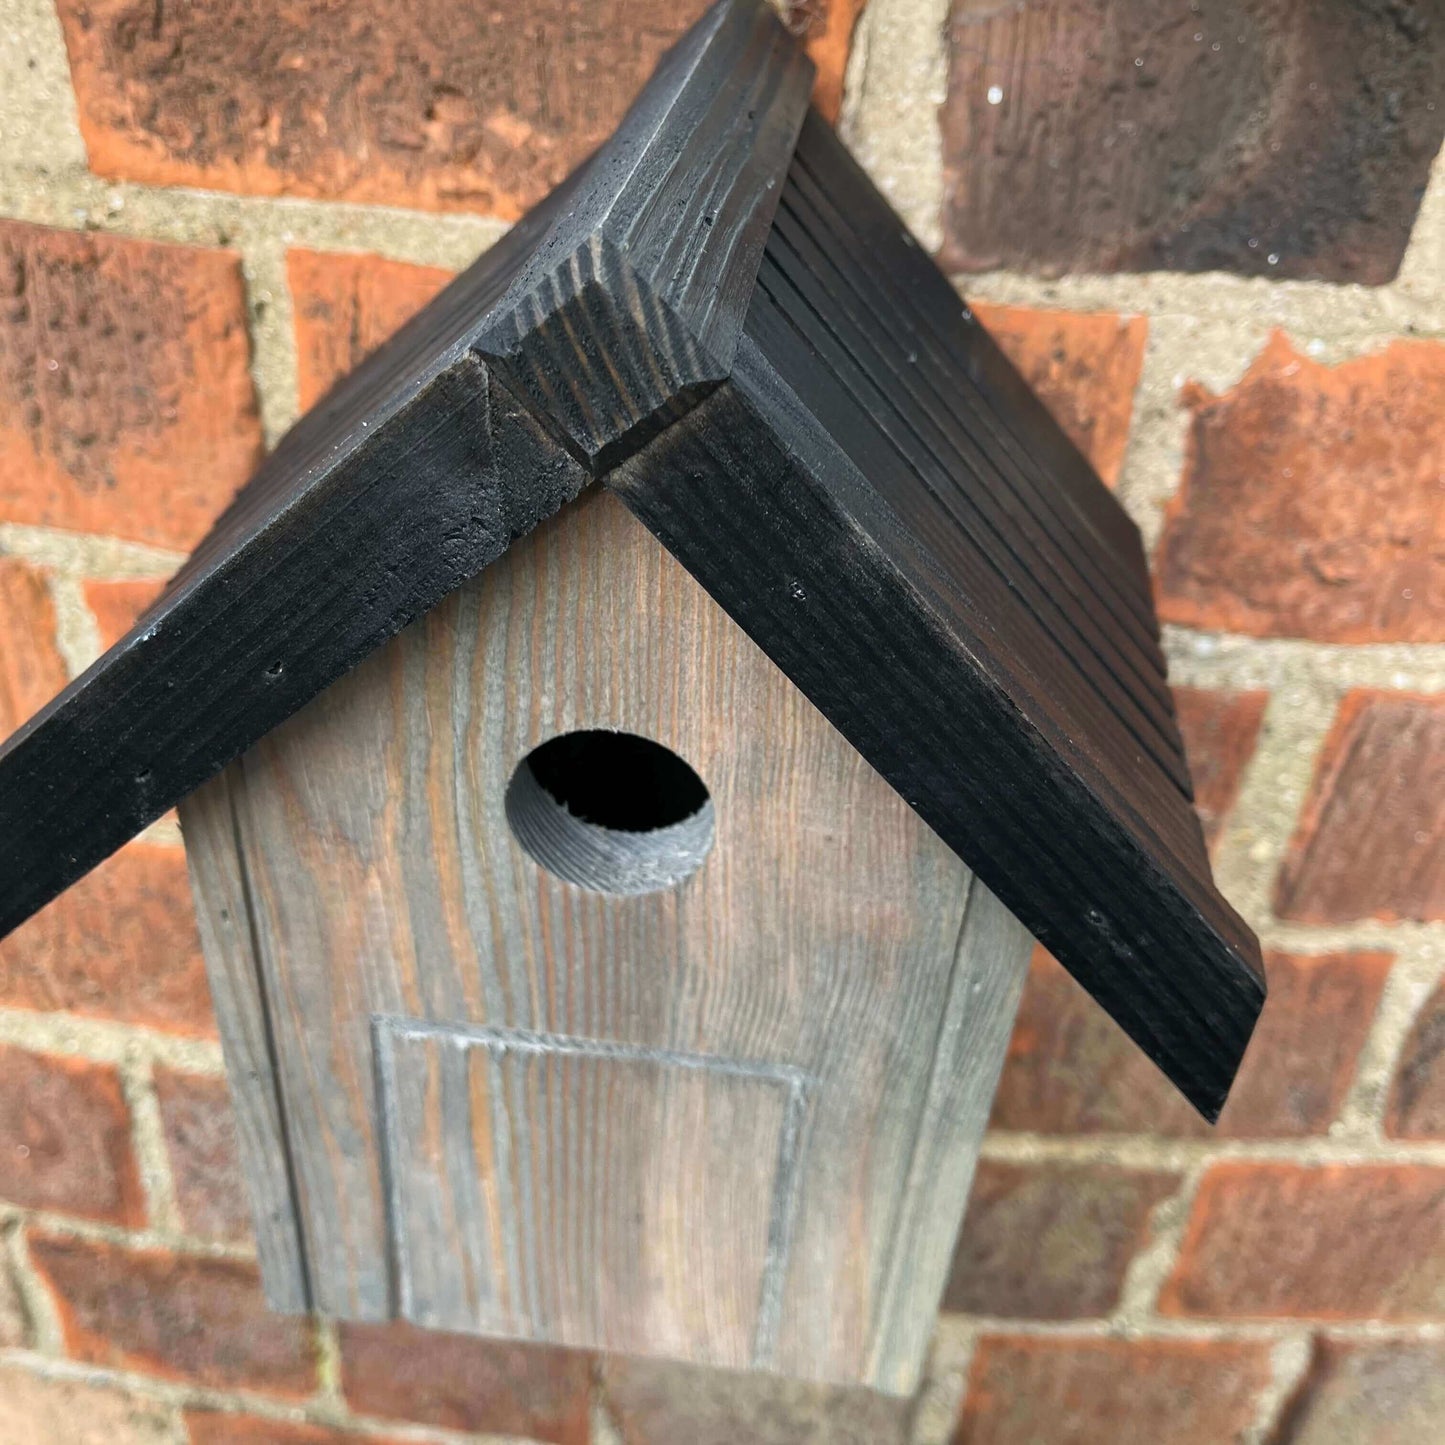 The garden nest box is pre-drilled for ease of installing. 